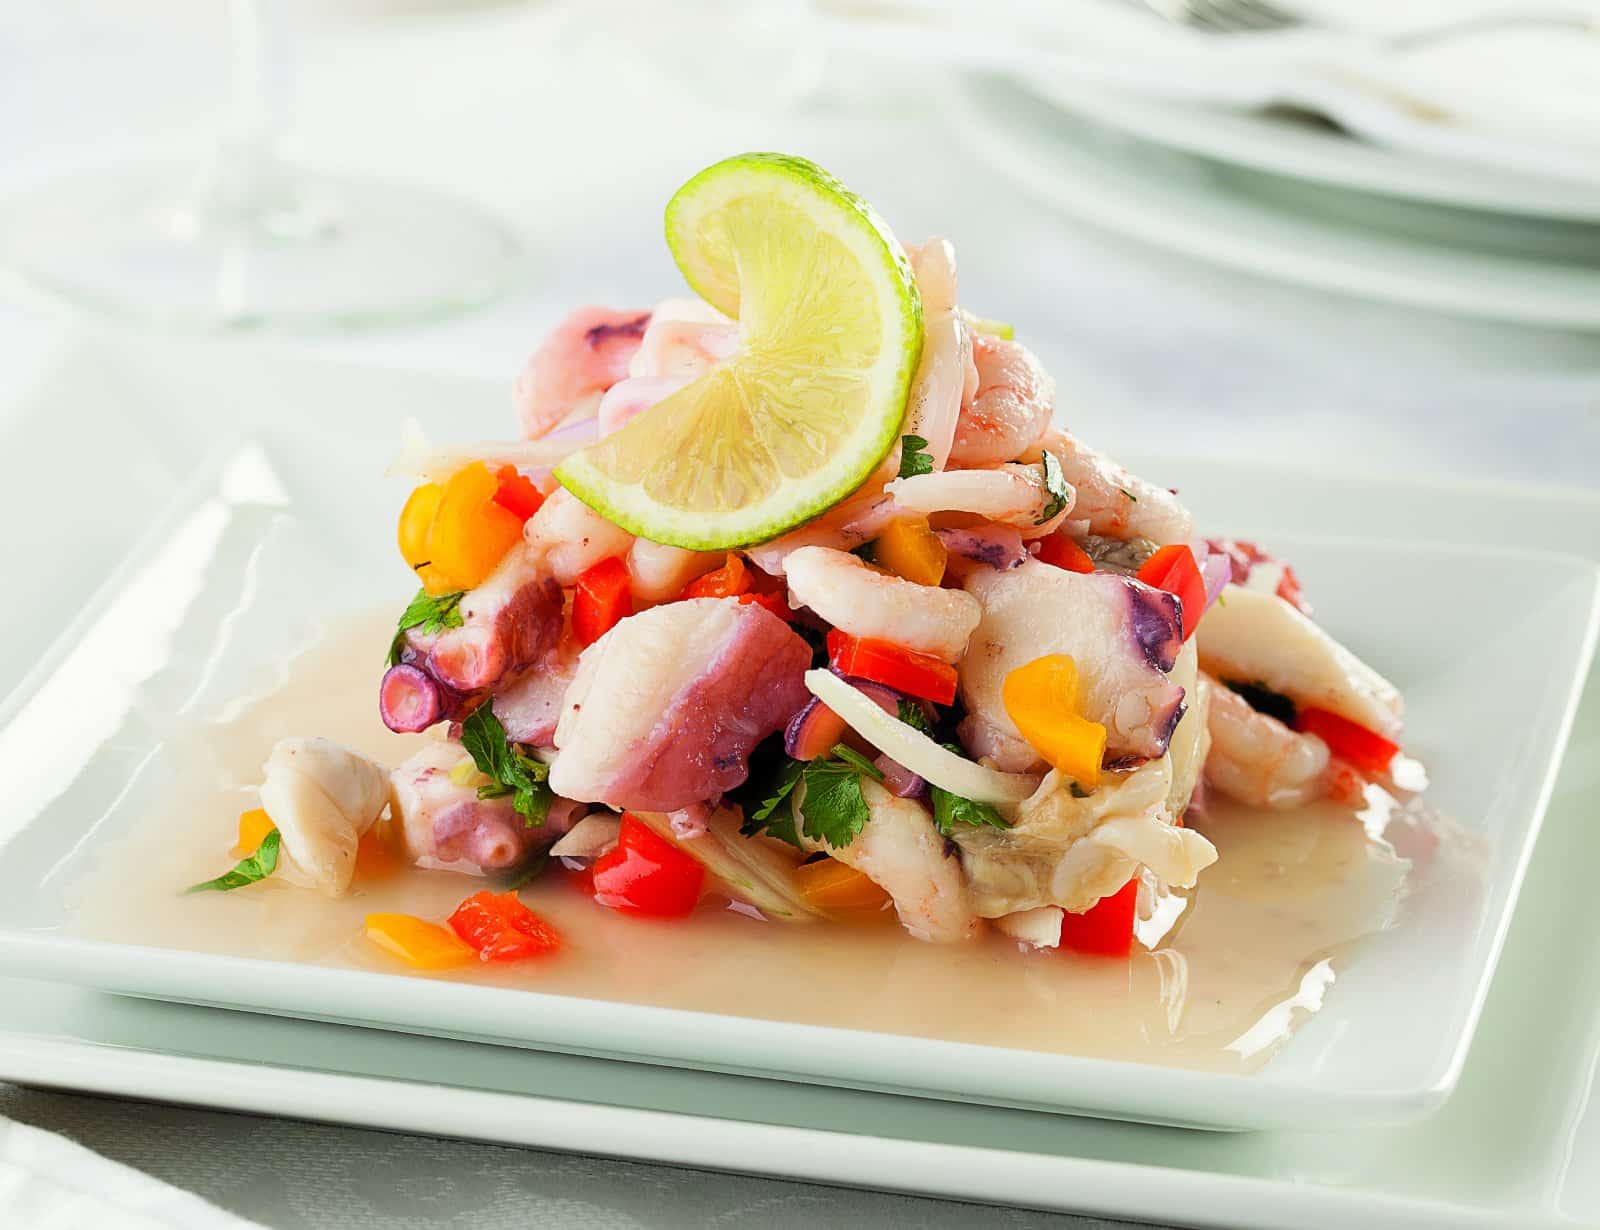 <p class="wp-caption-text">Image Credit: Shutterstock / Hans Geel</p>  <p><span>Peruvian cuisine is a fusion of indigenous, Spanish, African, Chinese, and Japanese influences, resulting in a rich culinary landscape. Ceviche, fresh fish marinated in citrus juices, is perhaps its most famous dish, but the cuisine goes far beyond this iconic meal. Ingredients like quinoa, potatoes, and aji peppers form the backbone of the cuisine, while dishes such as Lomo Saltado and Aji de Gallina highlight its complexity and depth.</span></p>